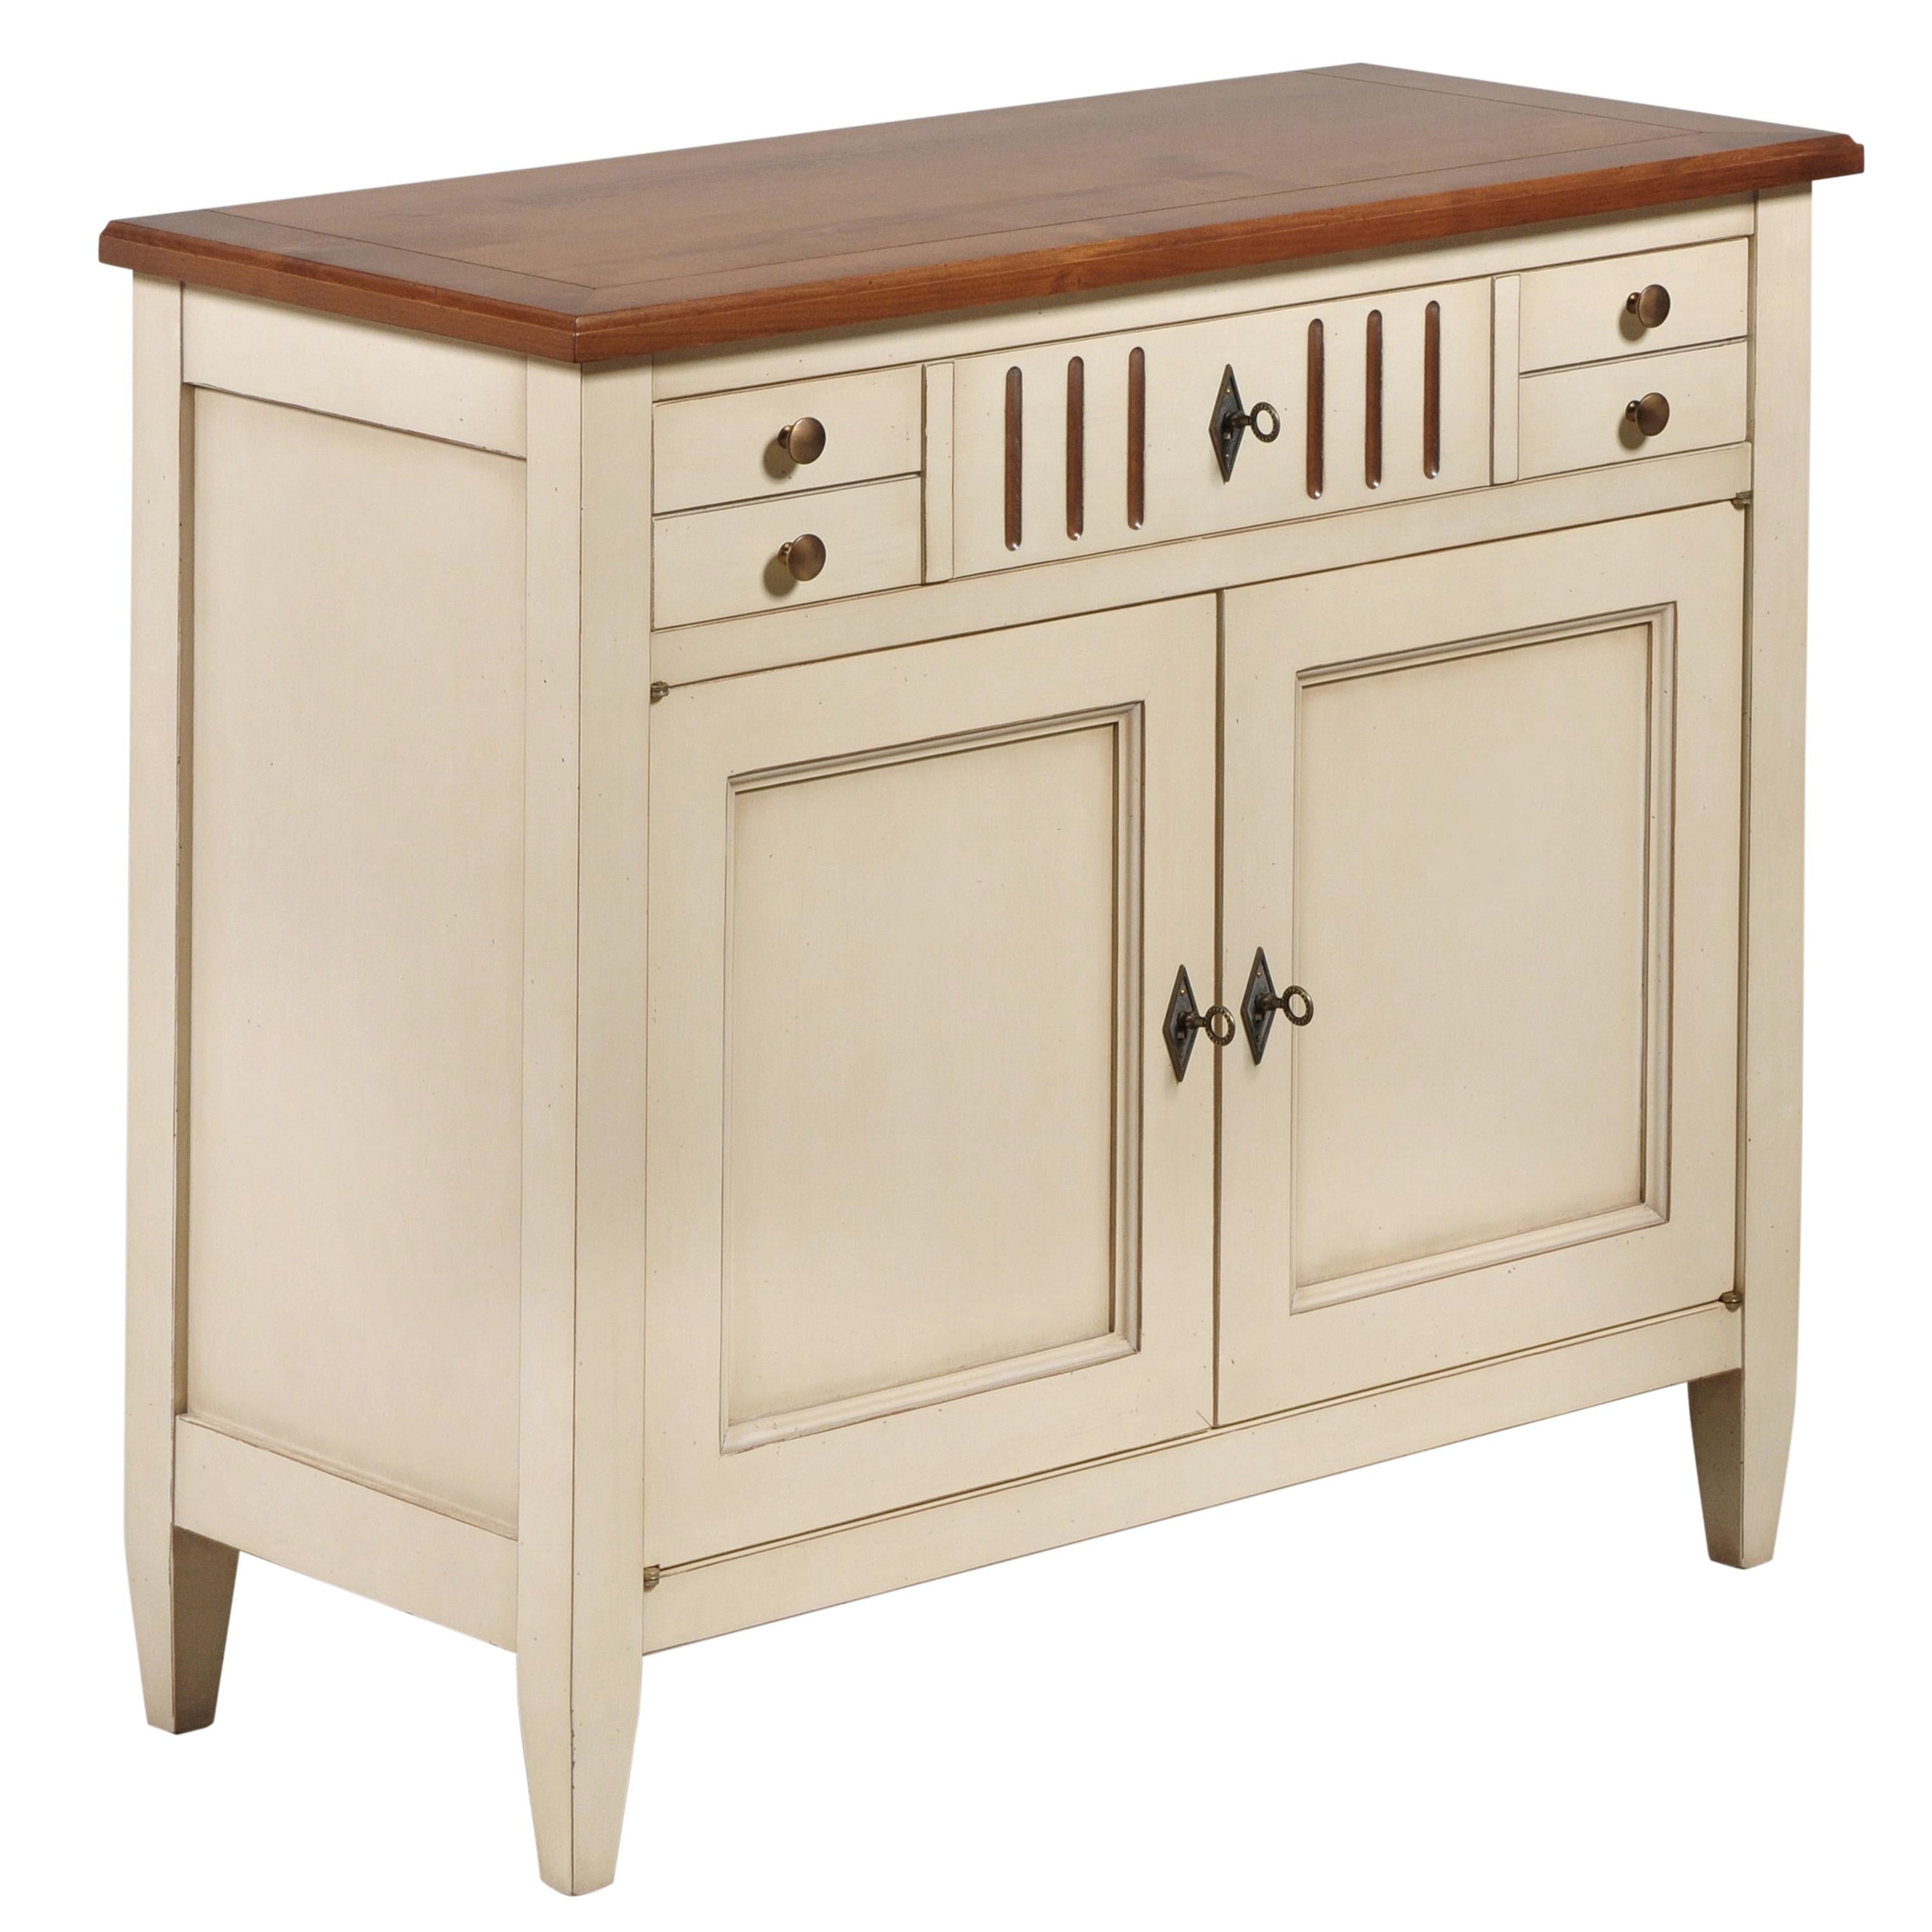 This 2 doors small sideboard ( 